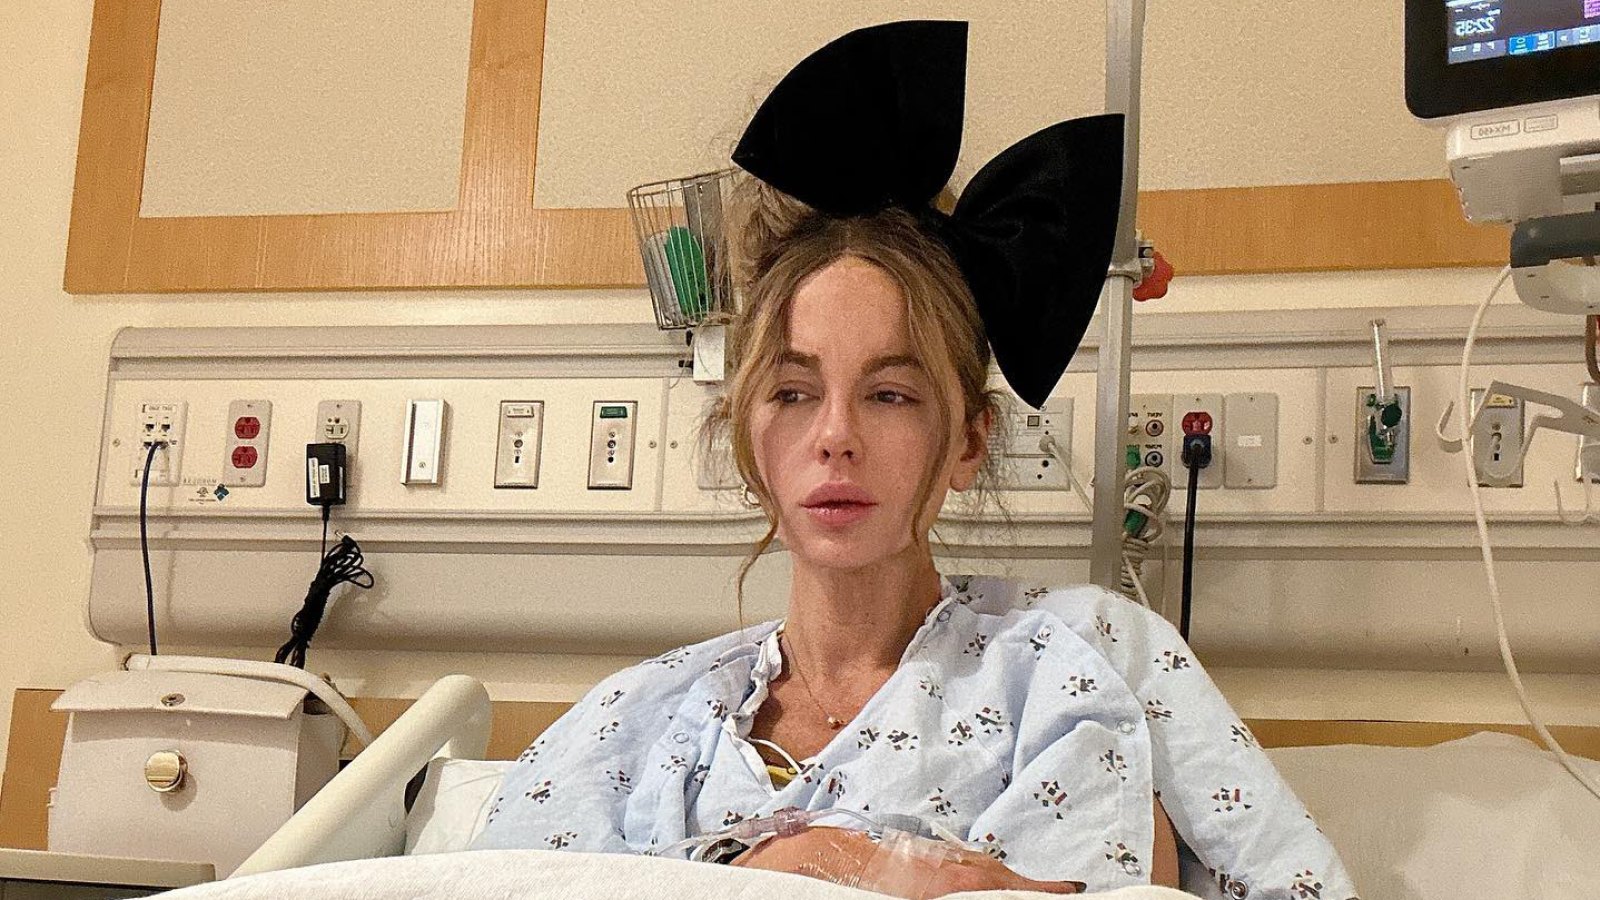 Kate Beckinsale Shares Selfie From Hospital Bed Days After 1st Revealing Treatment